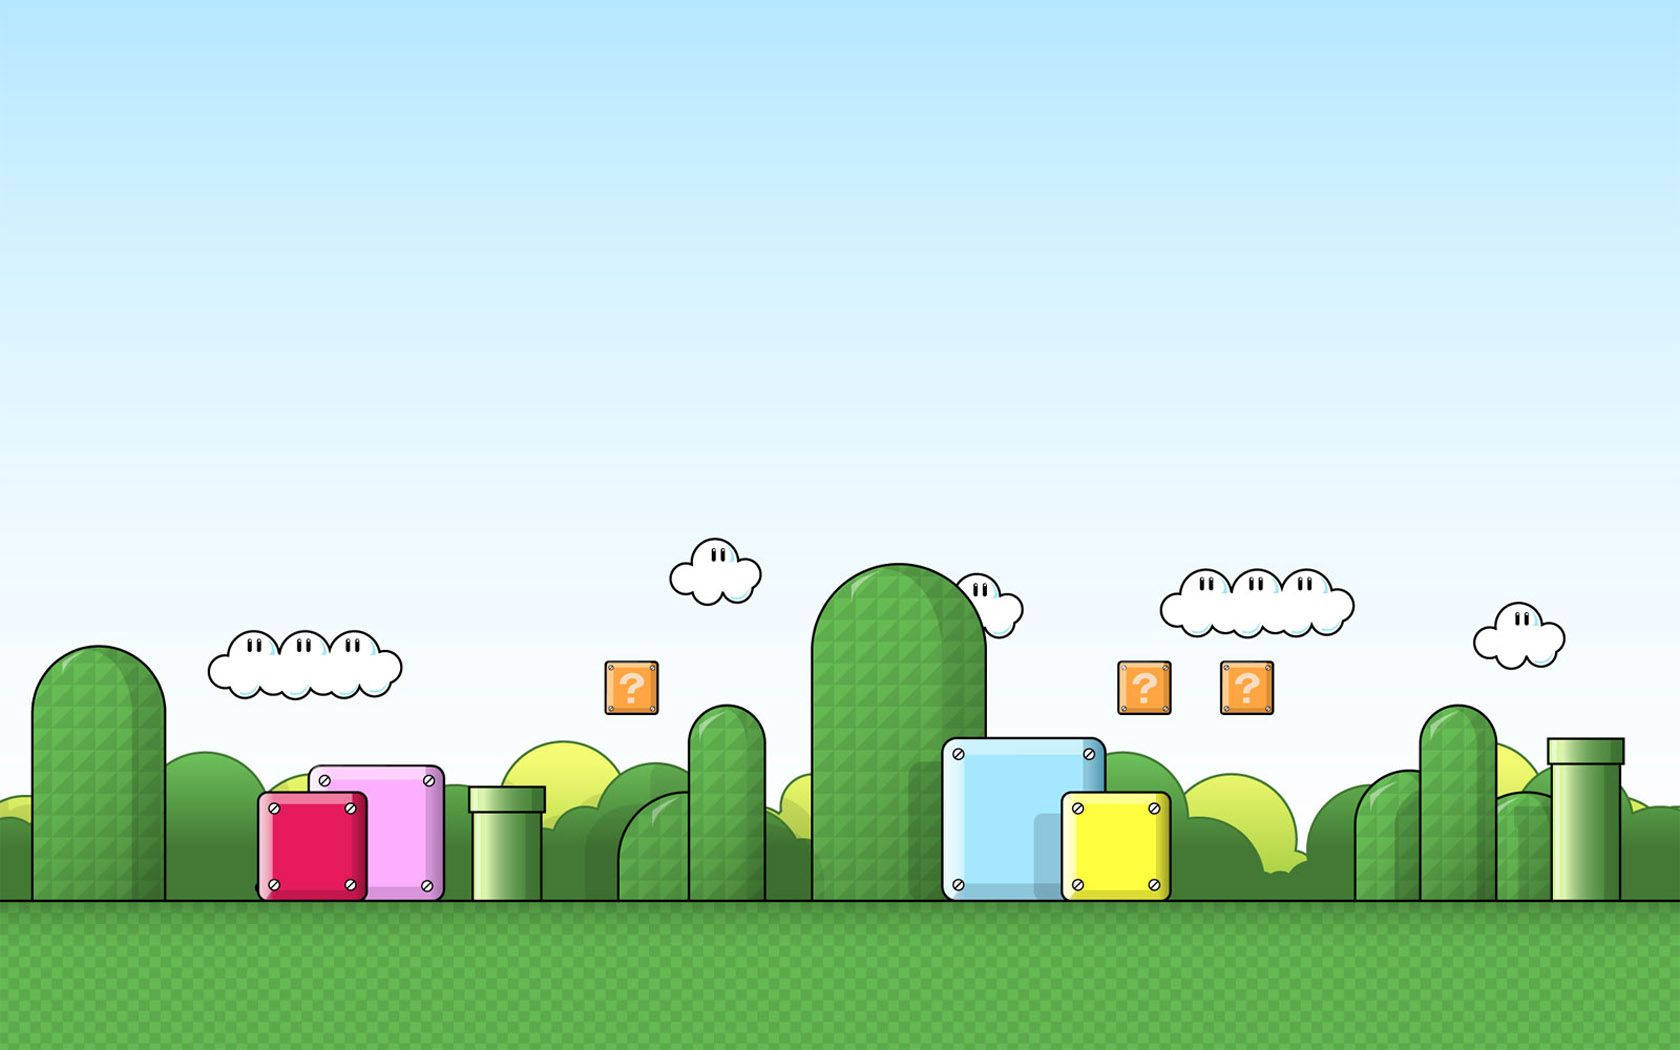 Play as Mario in this exciting Super Mario Landscape Wallpaper